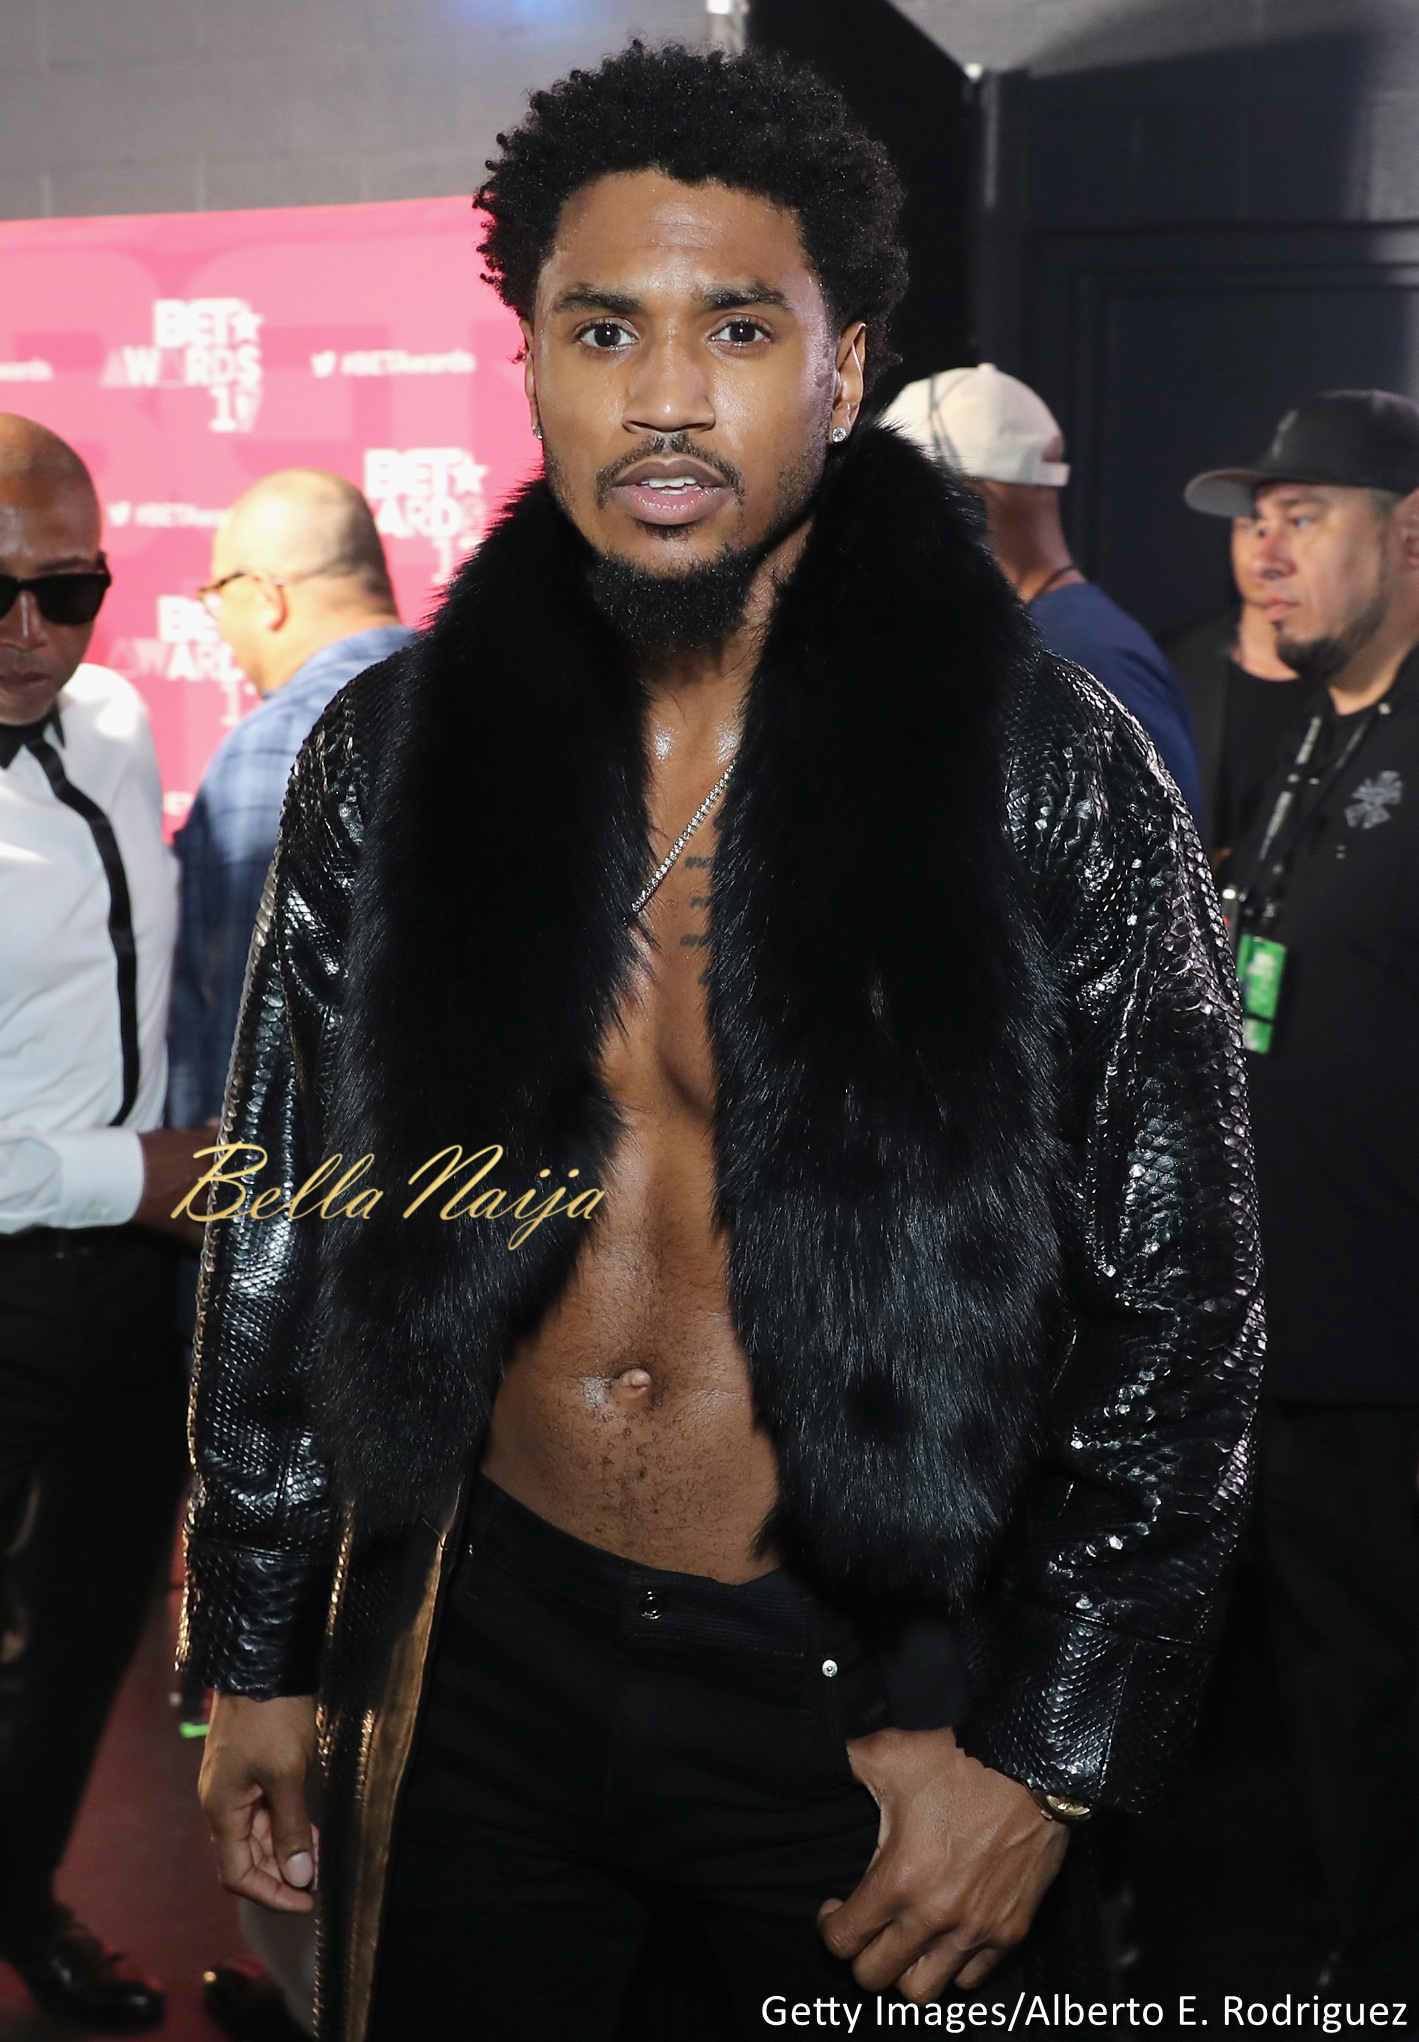 Trey Songz arrested after allegedly Beating a Woman - BellaNaija